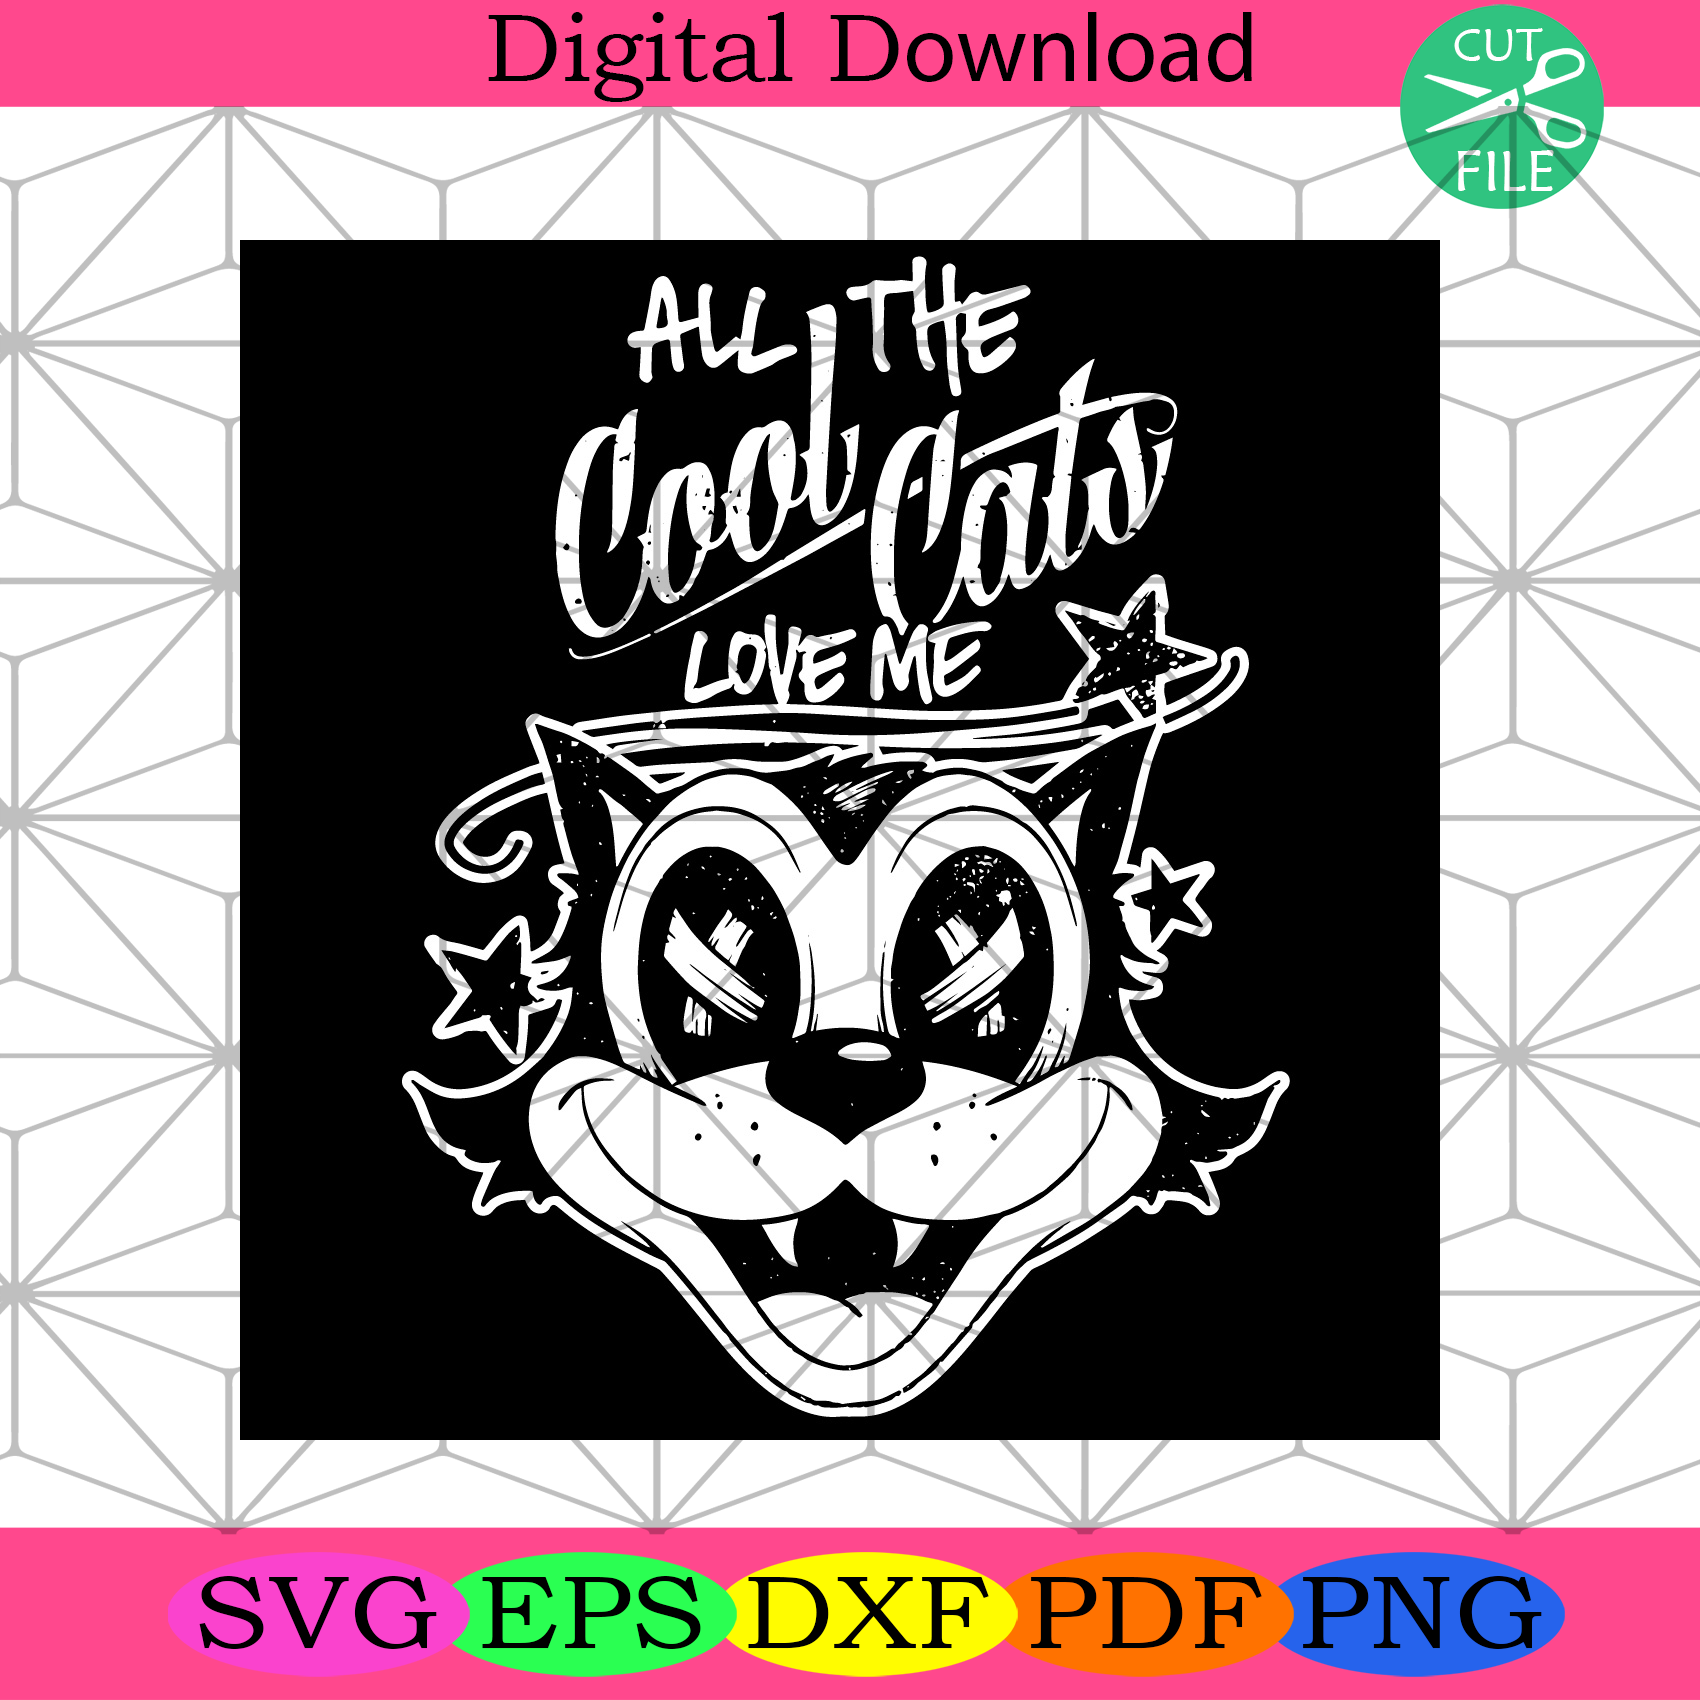 All the Cool Cats Love Me Svg Trending Svg, Cool Cat Svg, Cat Svg